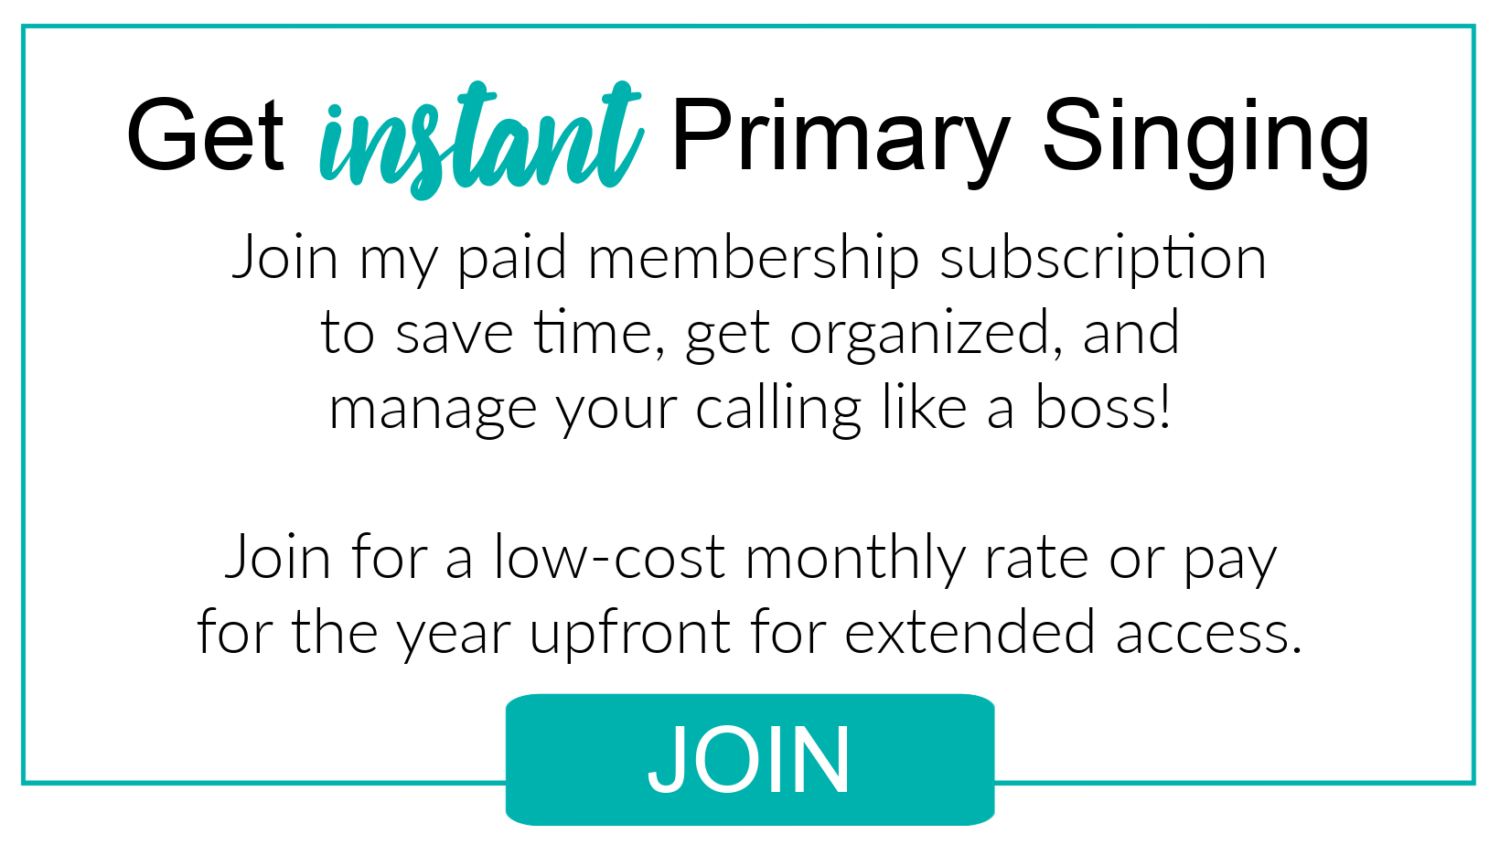 INSTANT Primary Singing membership subscription for immediate 1-click access to all singing time ideas for the monthly Come Follow Me songs!